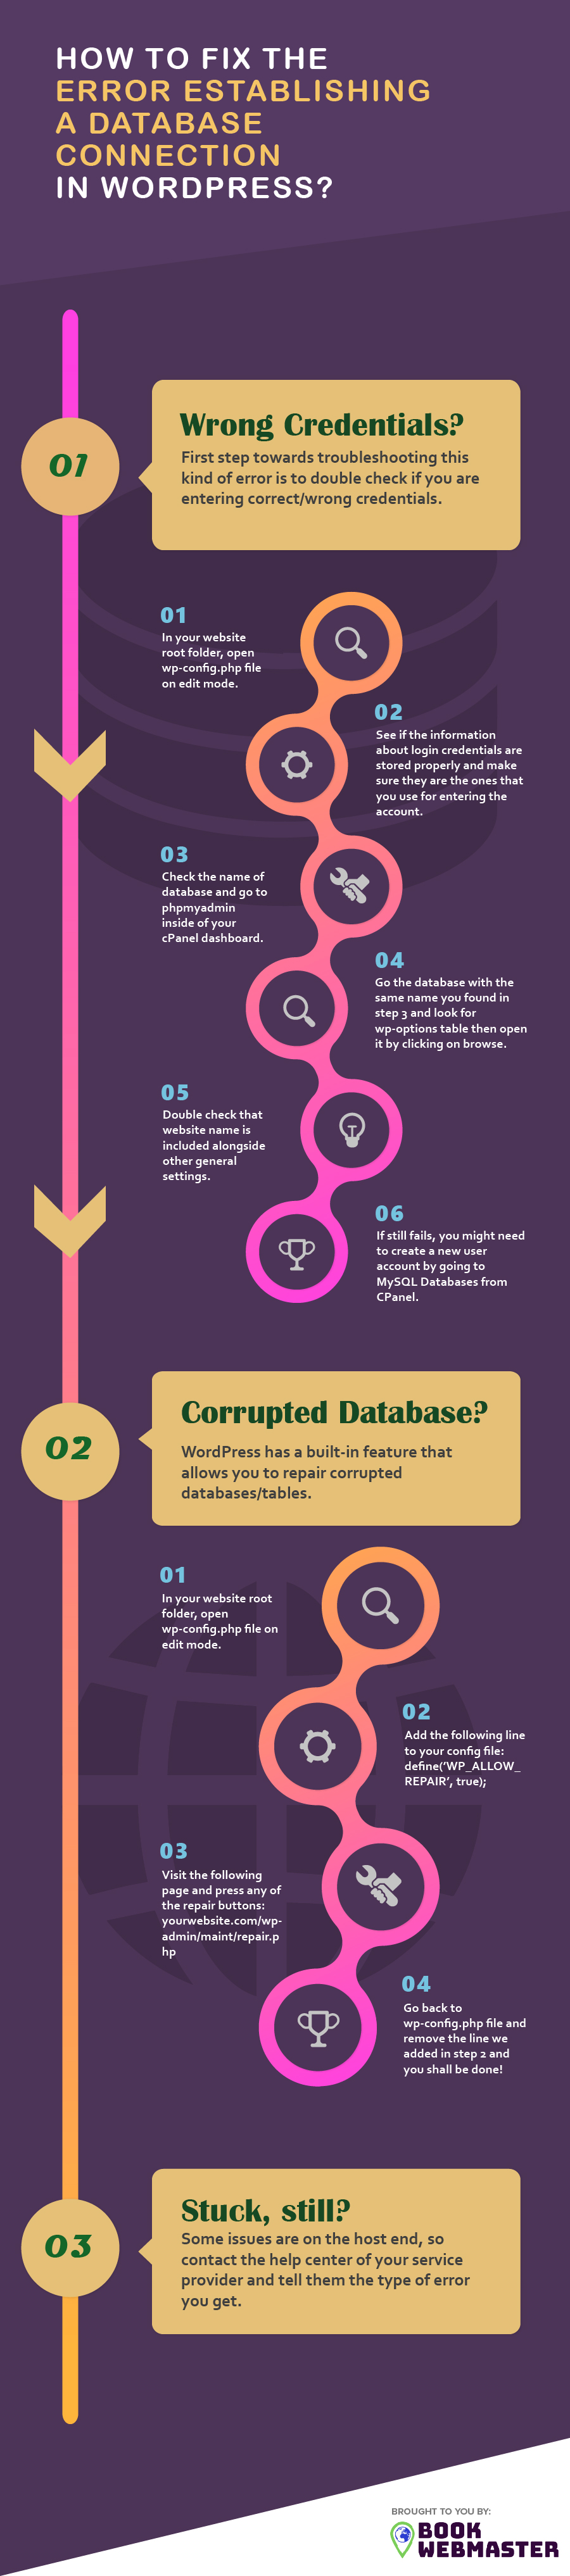 Infographic of Fixing the Error Establishing a Database Connection